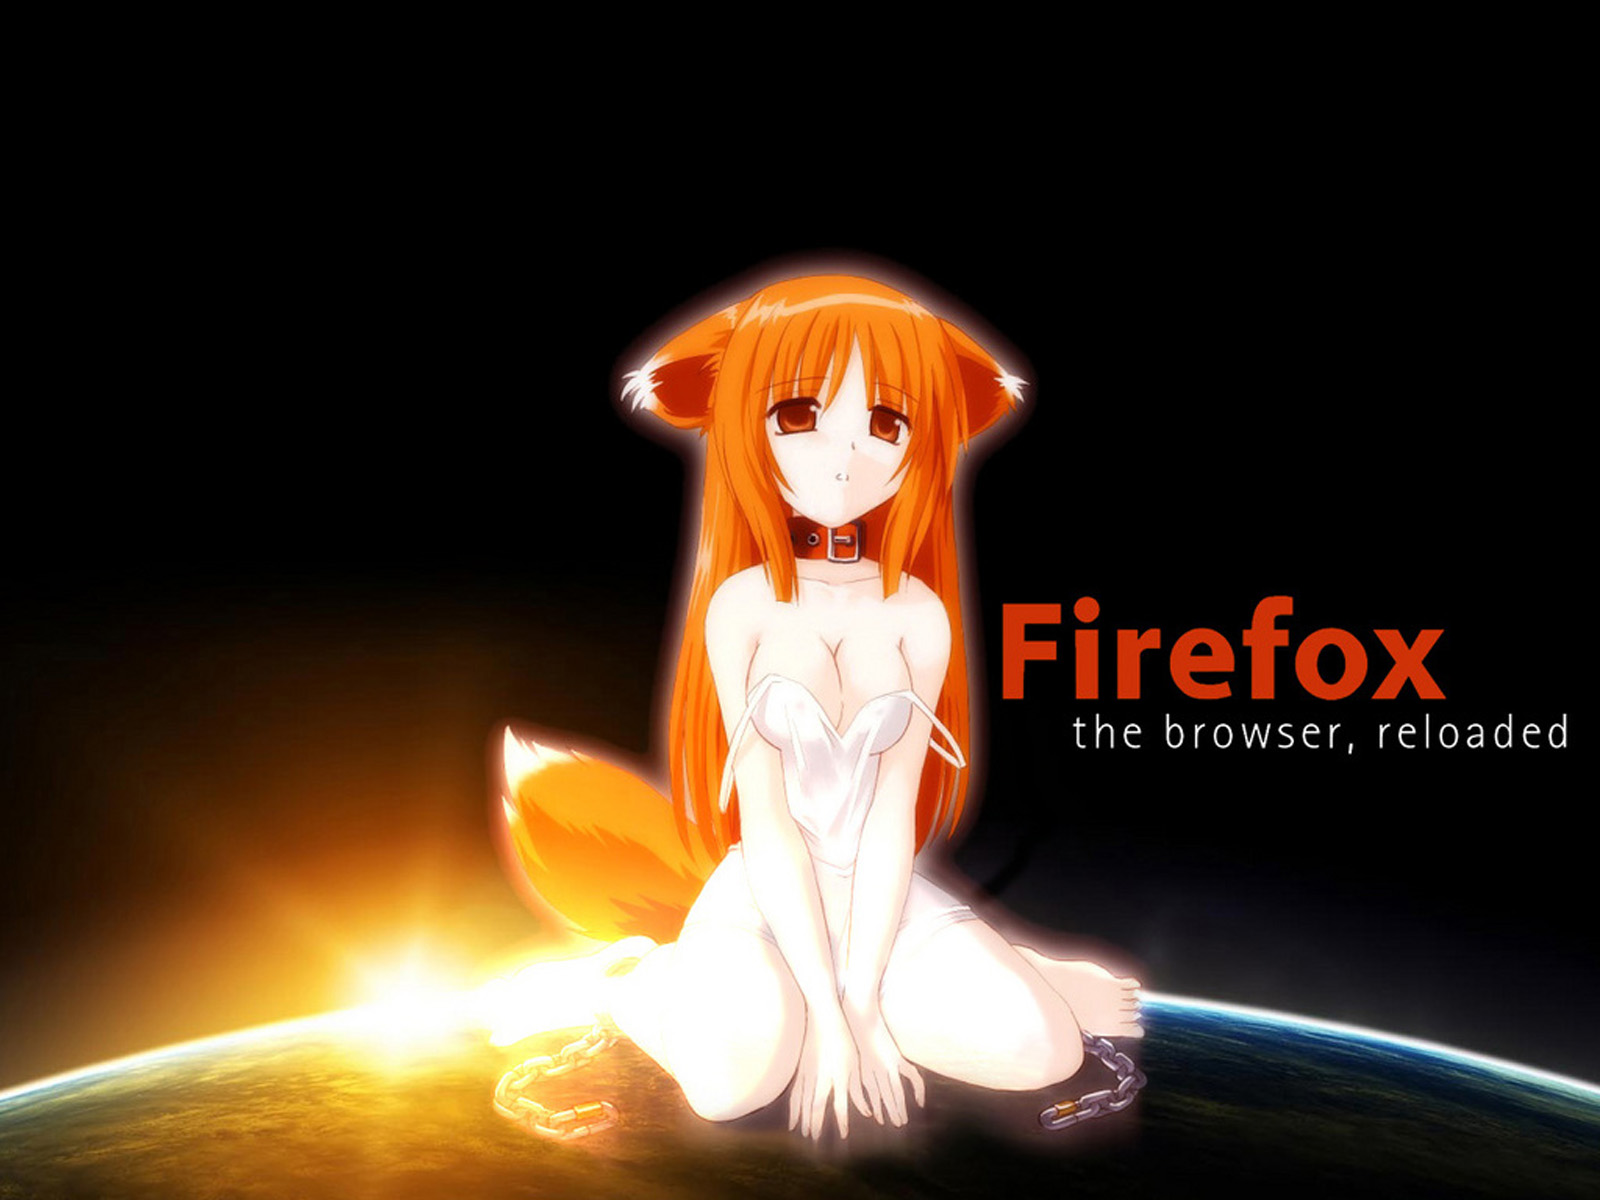 2880x900px | free download | HD wallpaper: Firefox love girl 1600x1200 Anime  Hot Anime HD Art, lolicon | Wallpaper Flare